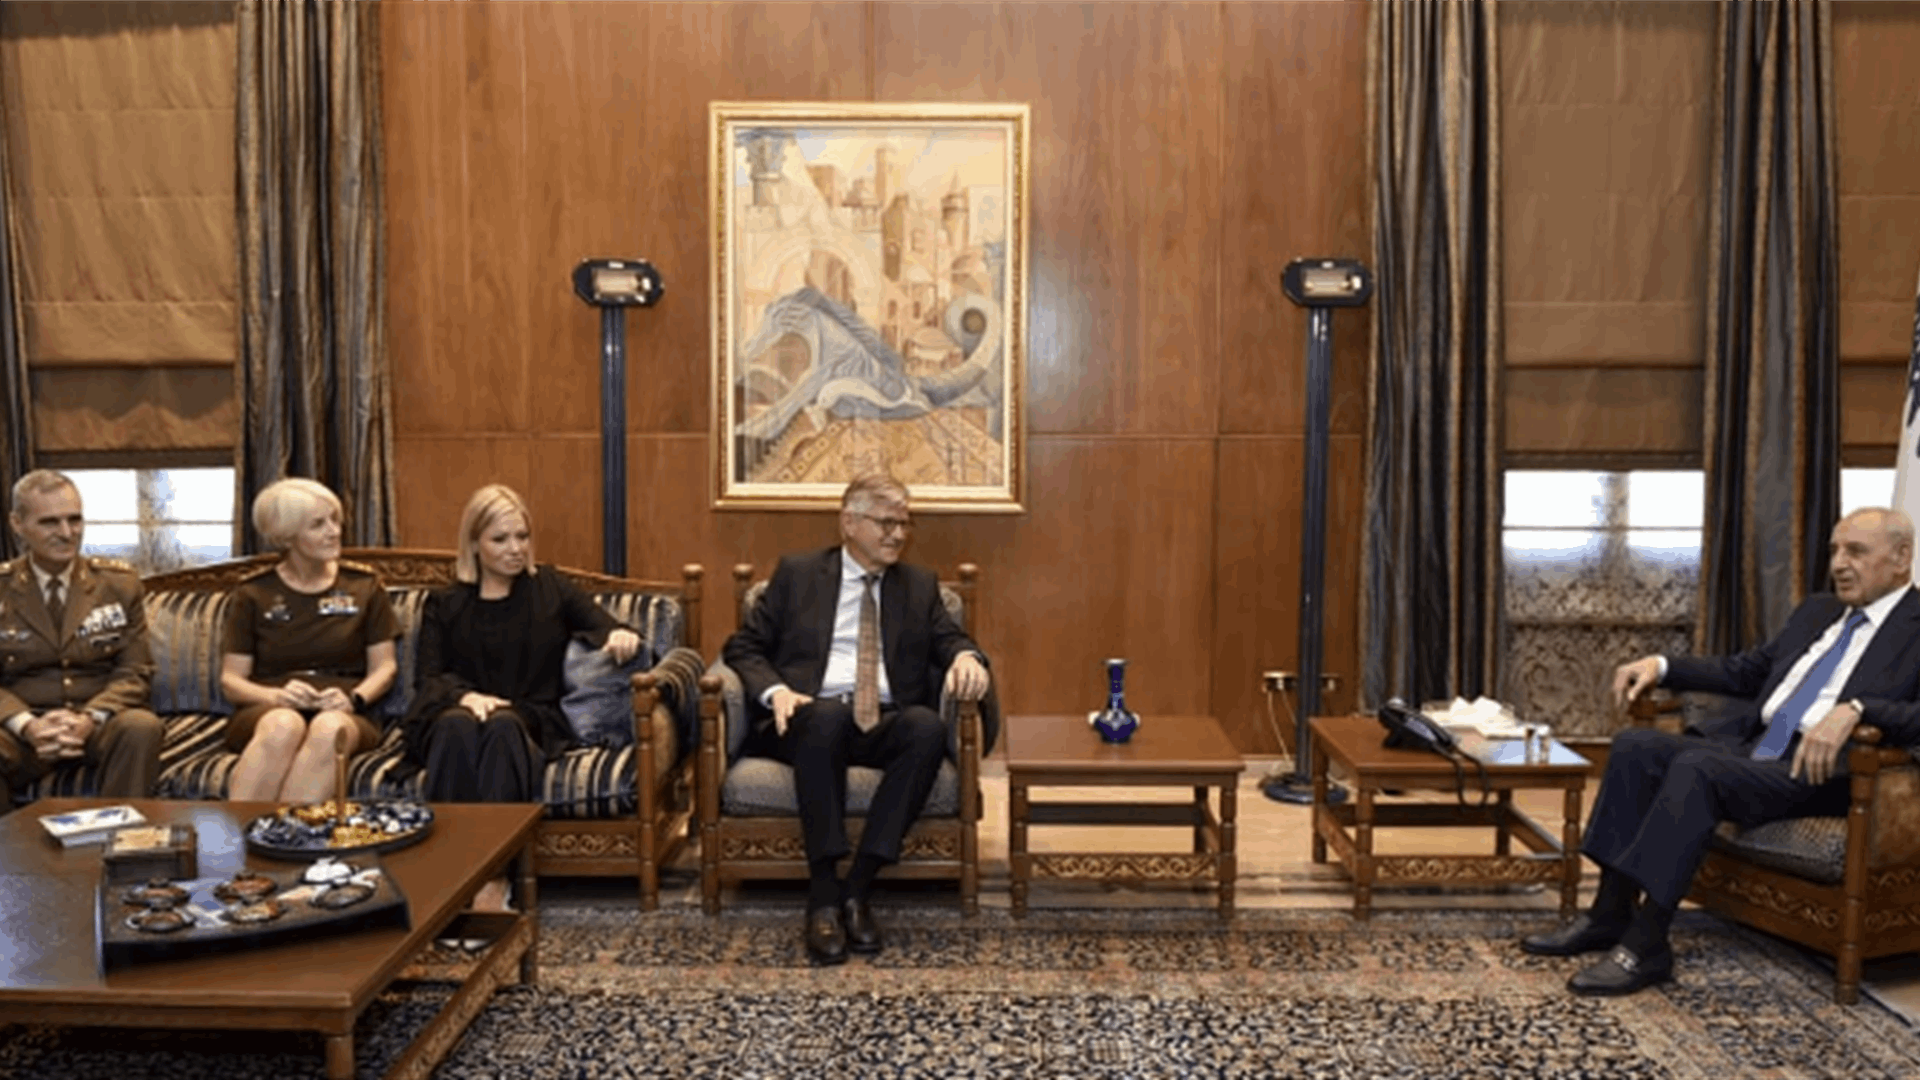 UN delegation and Berri address political and security concerns in Lebanon